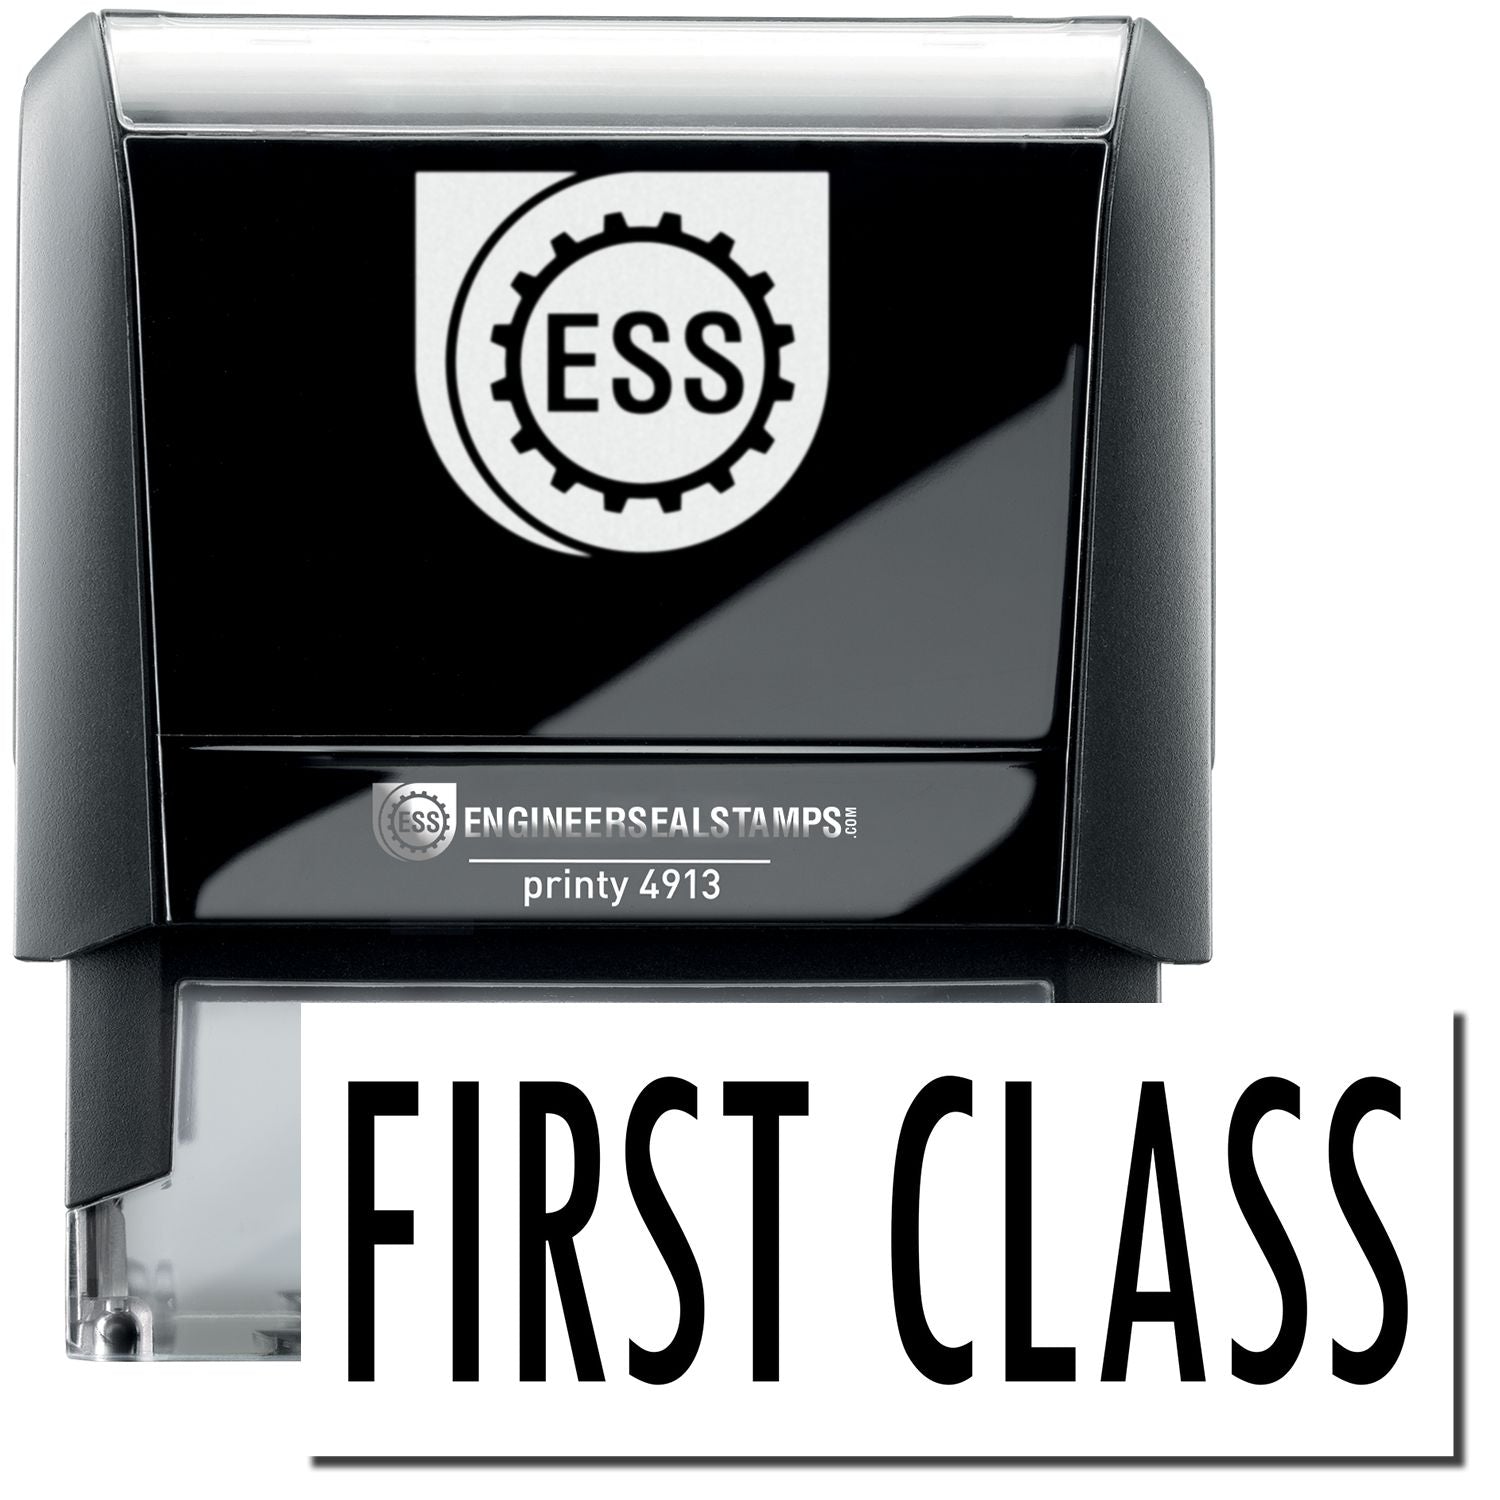 A self-inking stamp with a stamped image showing how the text "FIRST CLASS" in a large bold font is displayed by it.